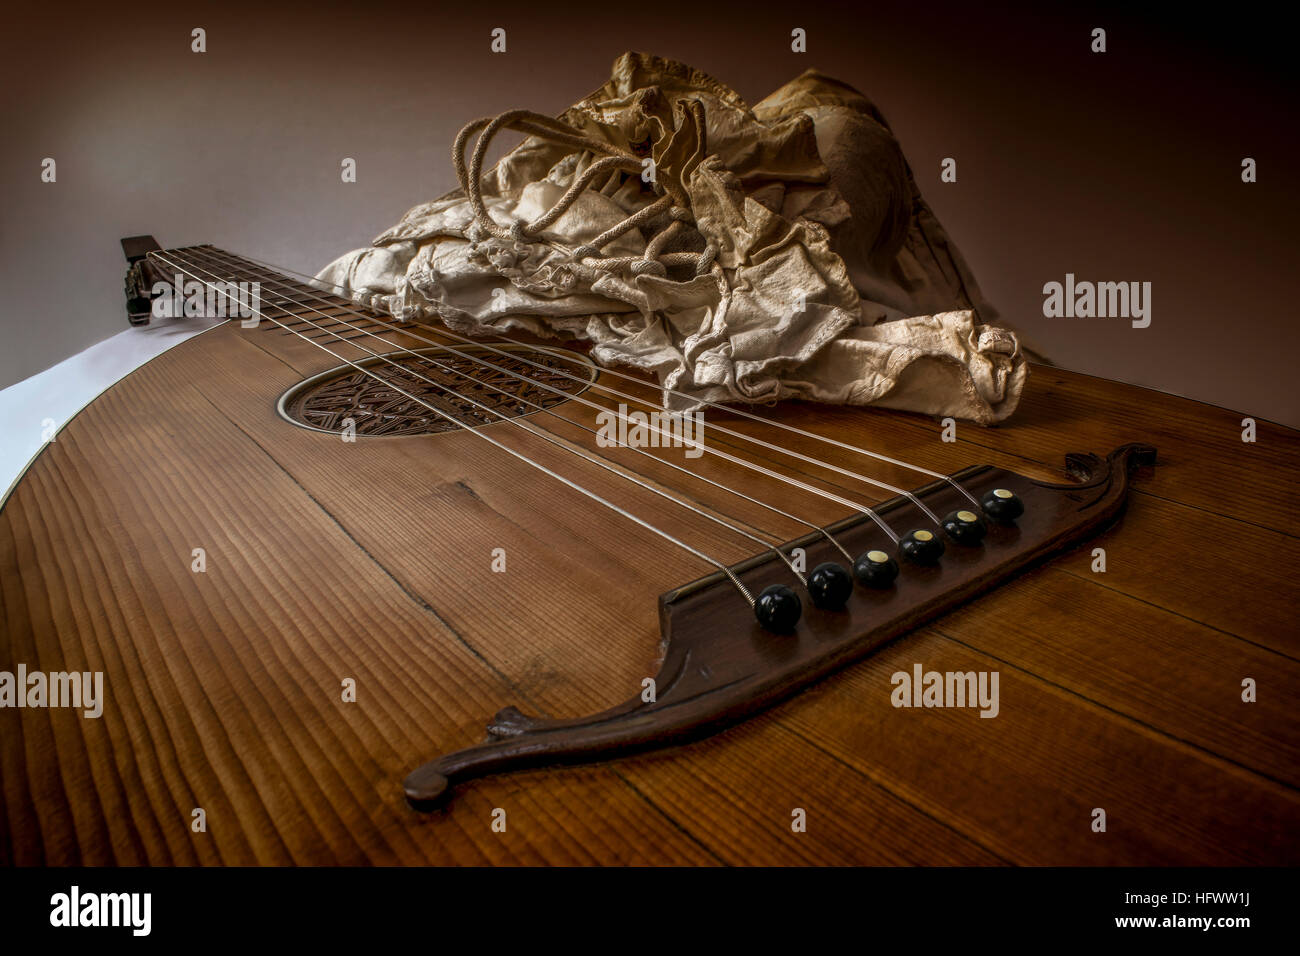 Oud Guitar Lute and white rustic baroque shirt In shape and posture of player Stock Photo